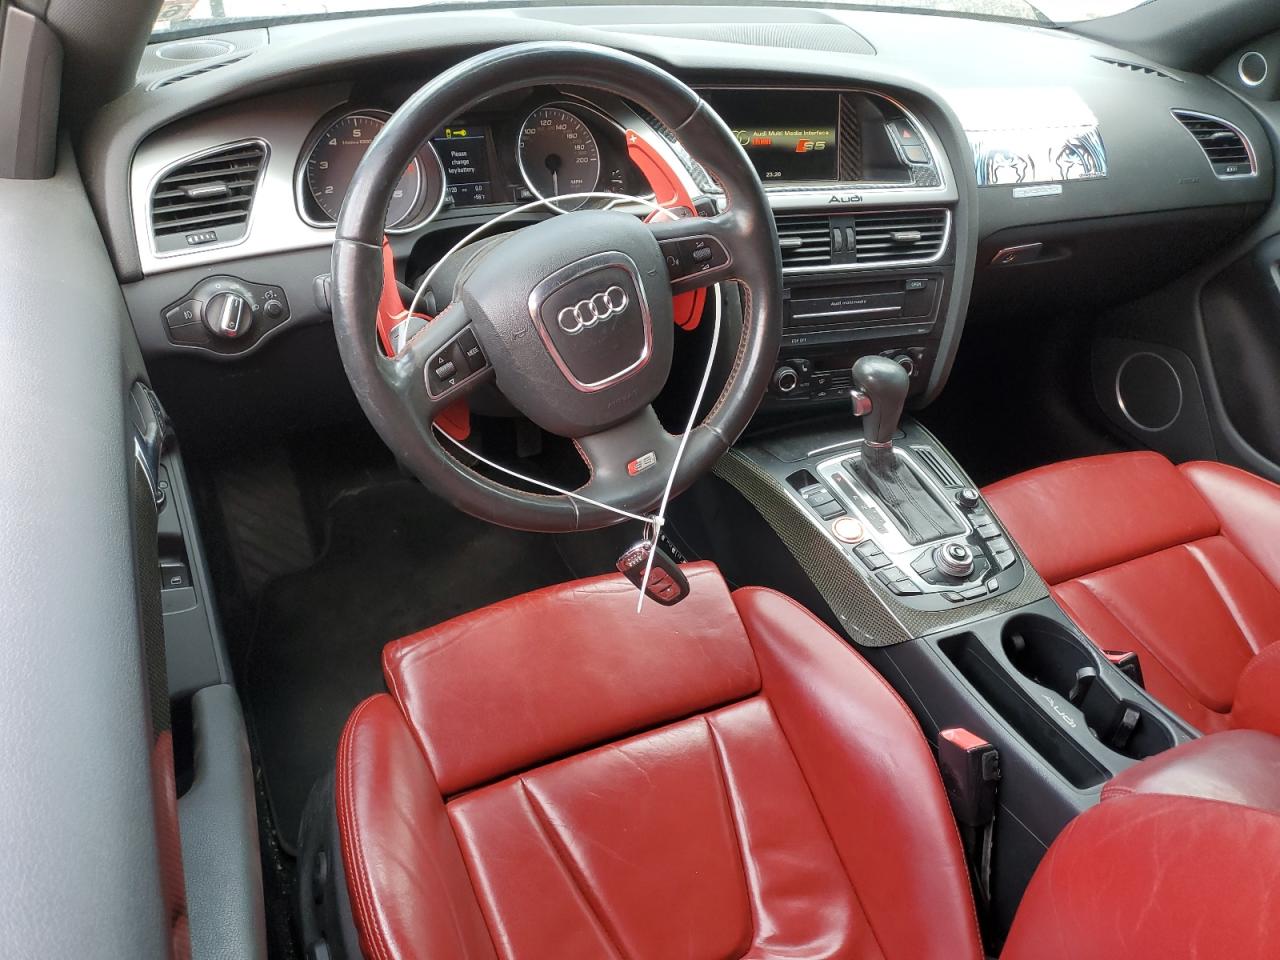 VIN: WAUVVAFR4AA009926 AUDI RS5 2010